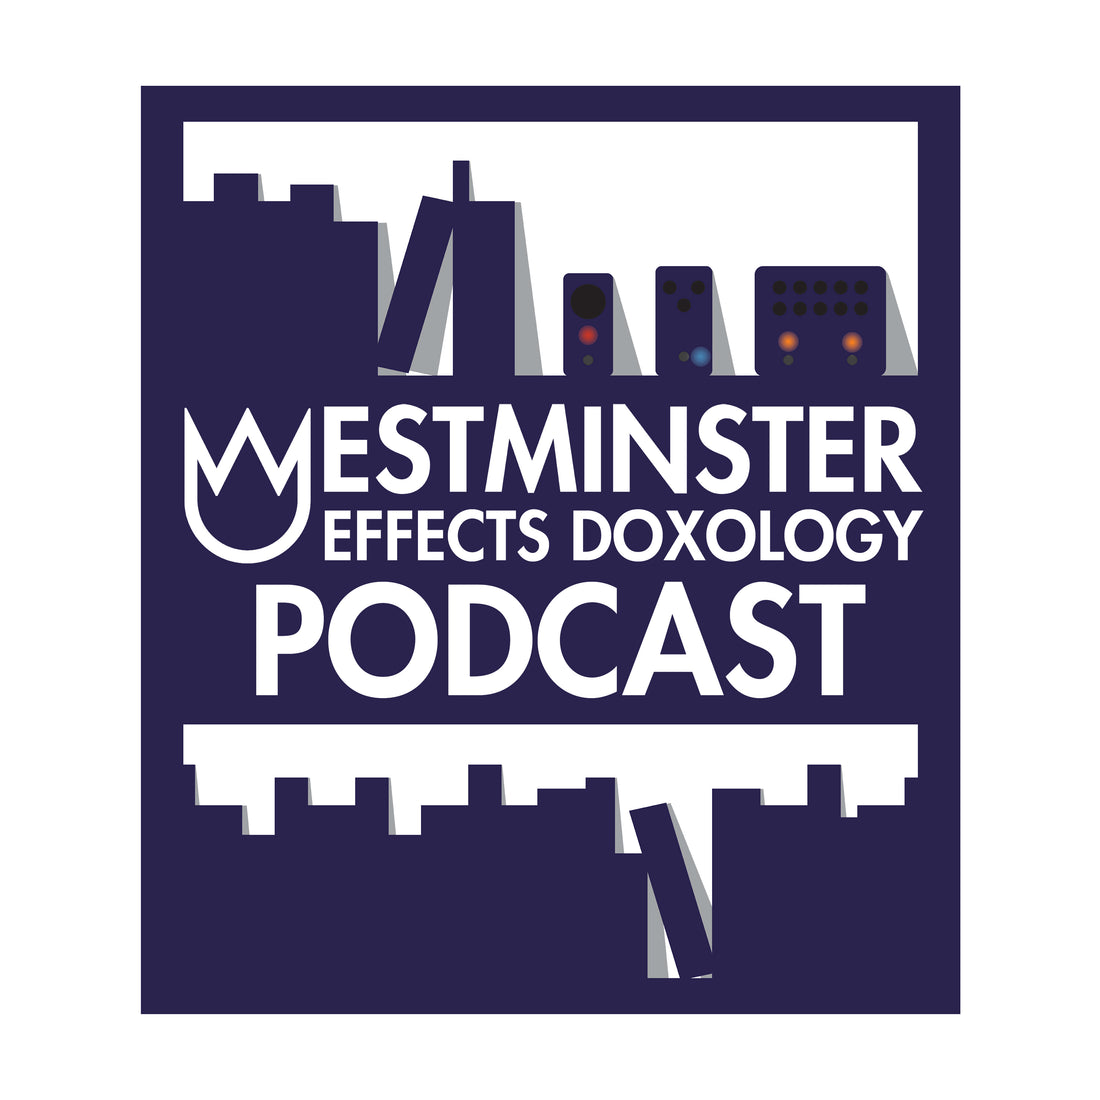 Doxology Podcast 247 - Mike Bickle's International House of Predators